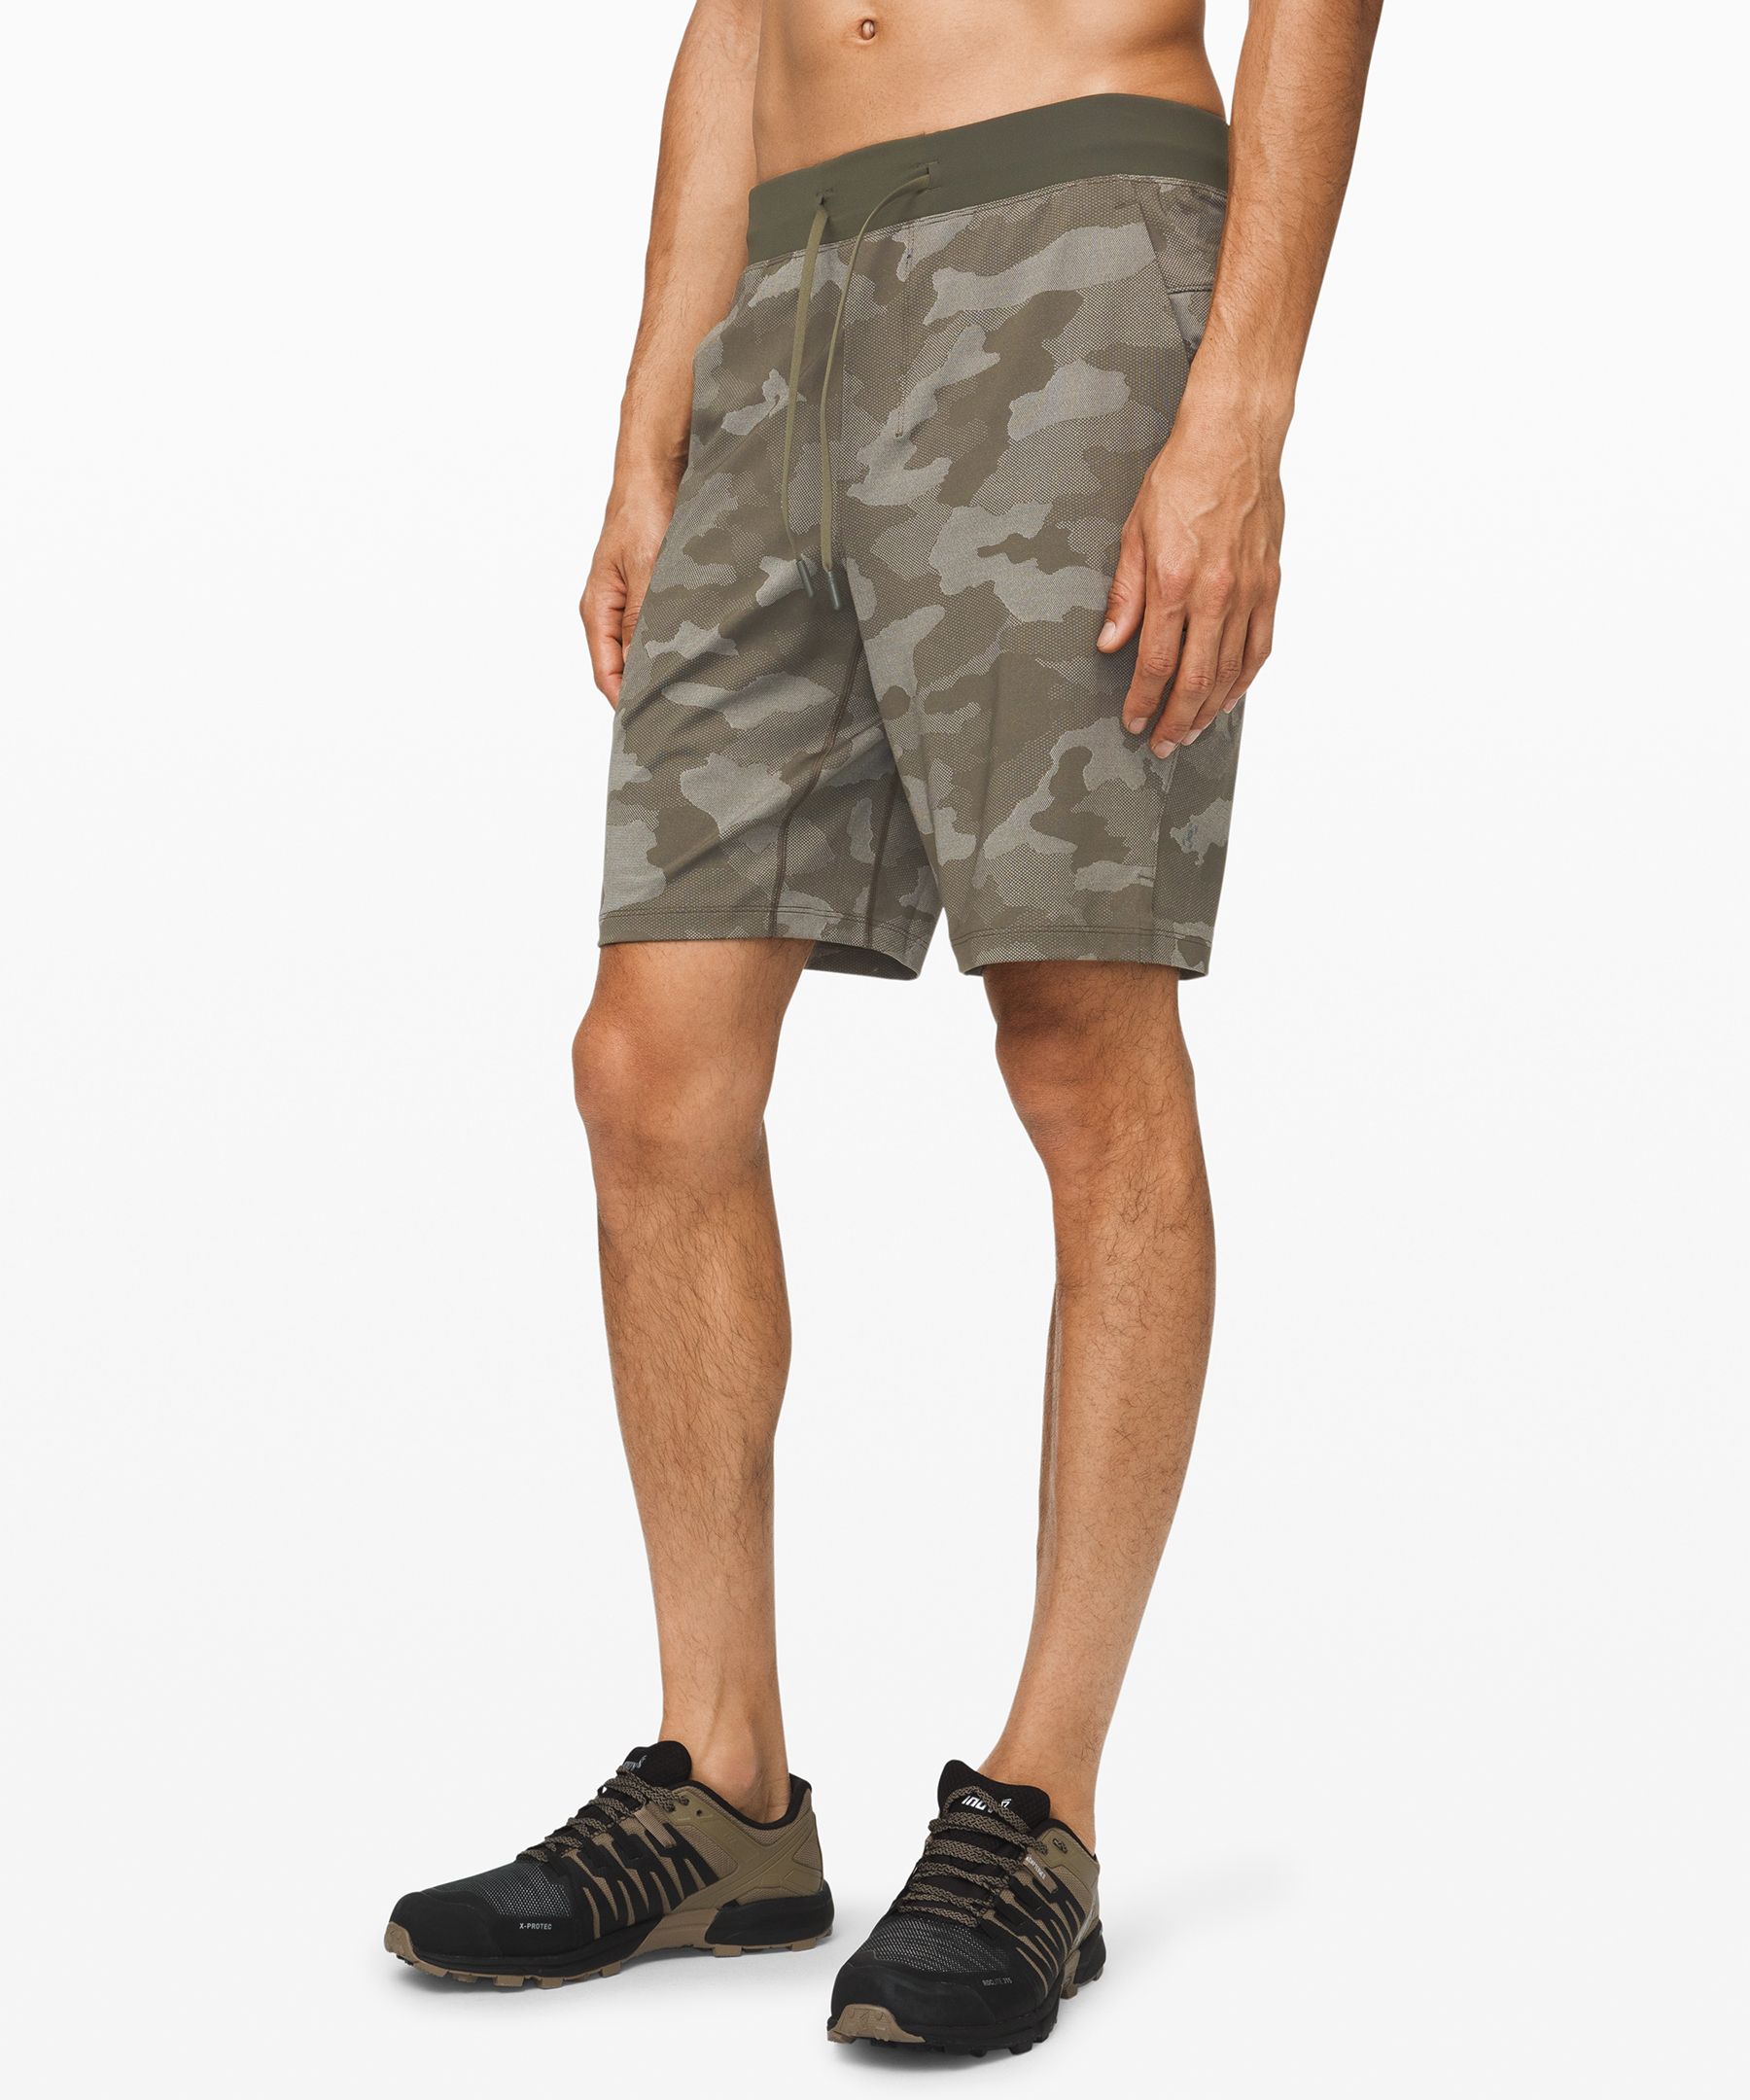 Lululemon T.h.e. Lined Shorts 9" In Variegated Mesh Camo Max Dark Olive